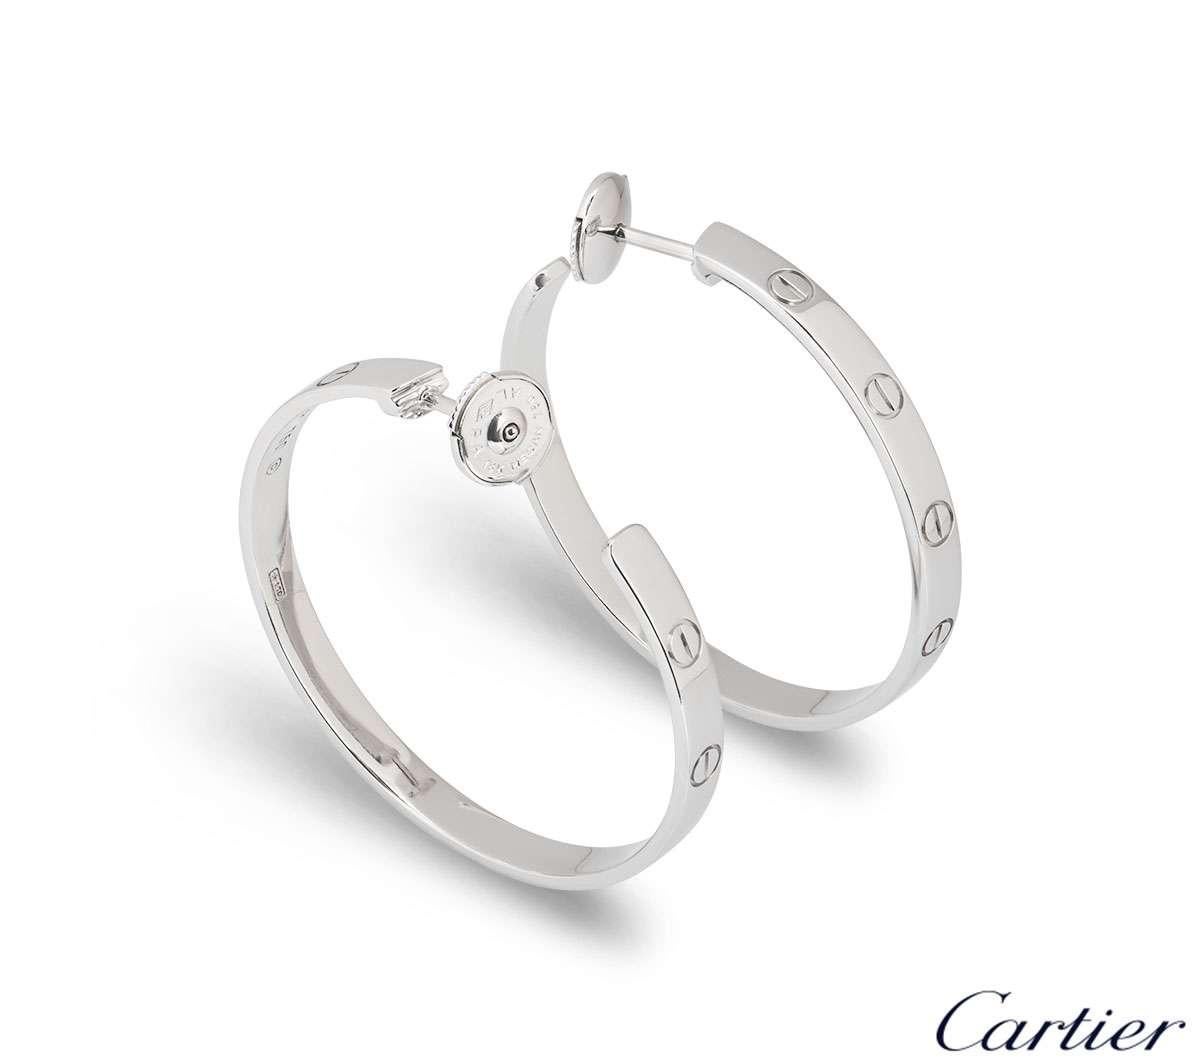 A stylish pair of 18k white gold Cartier hoop earrings from the Love collection. Each earring comprises of the iconic screw motif around the outer edge. The earrings measure 3.5mm in width and 3.5cm in height and feature post and alpha back